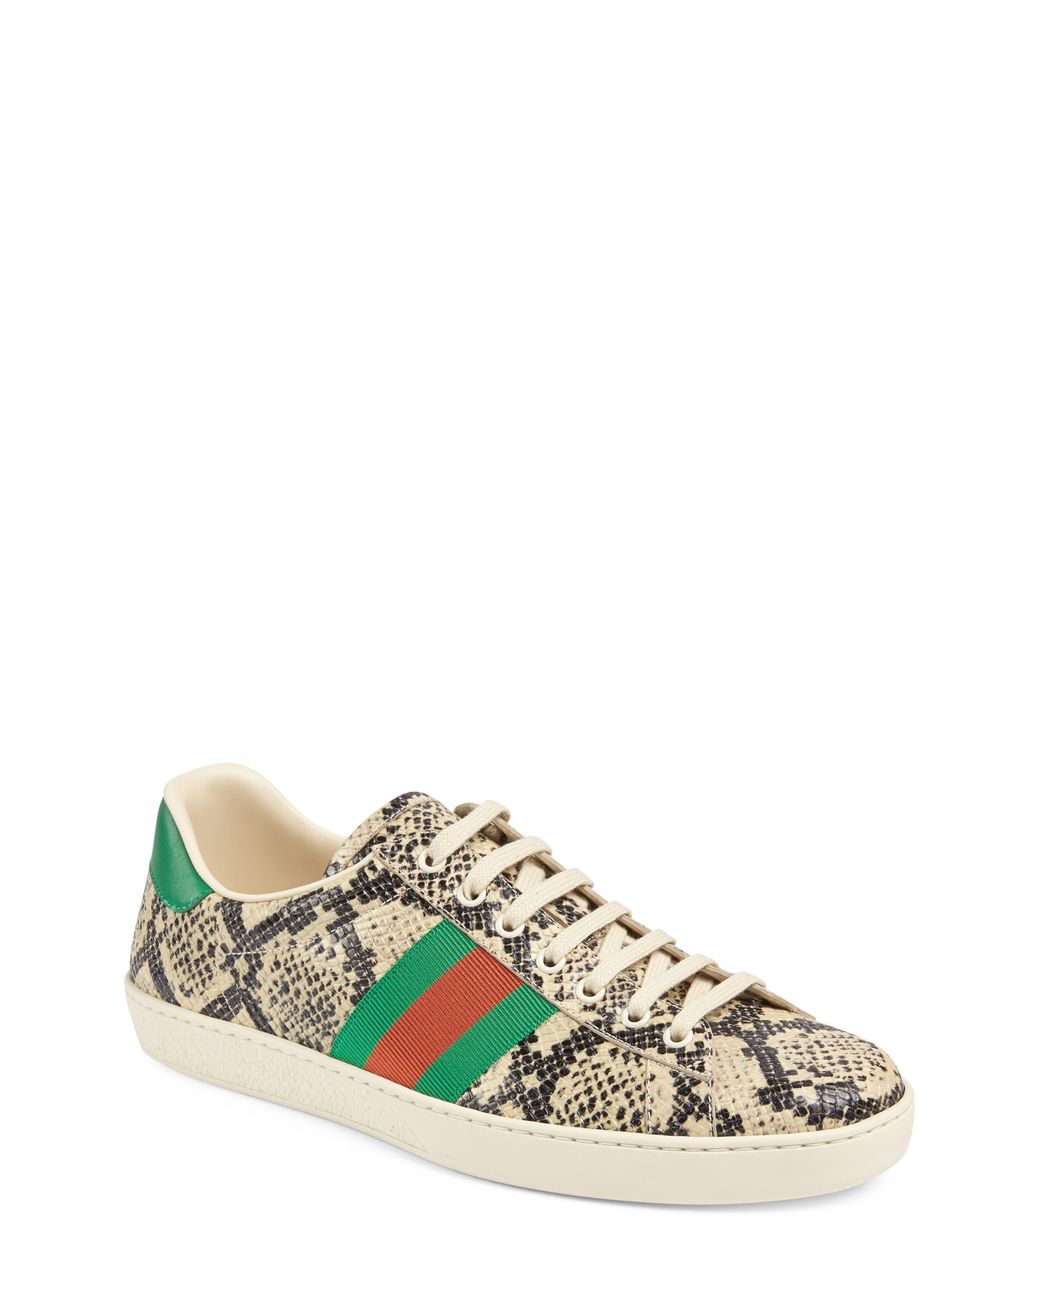 Gucci Leather Ace Low Top Sneaker in Beige (Natural) for Men - Lyst